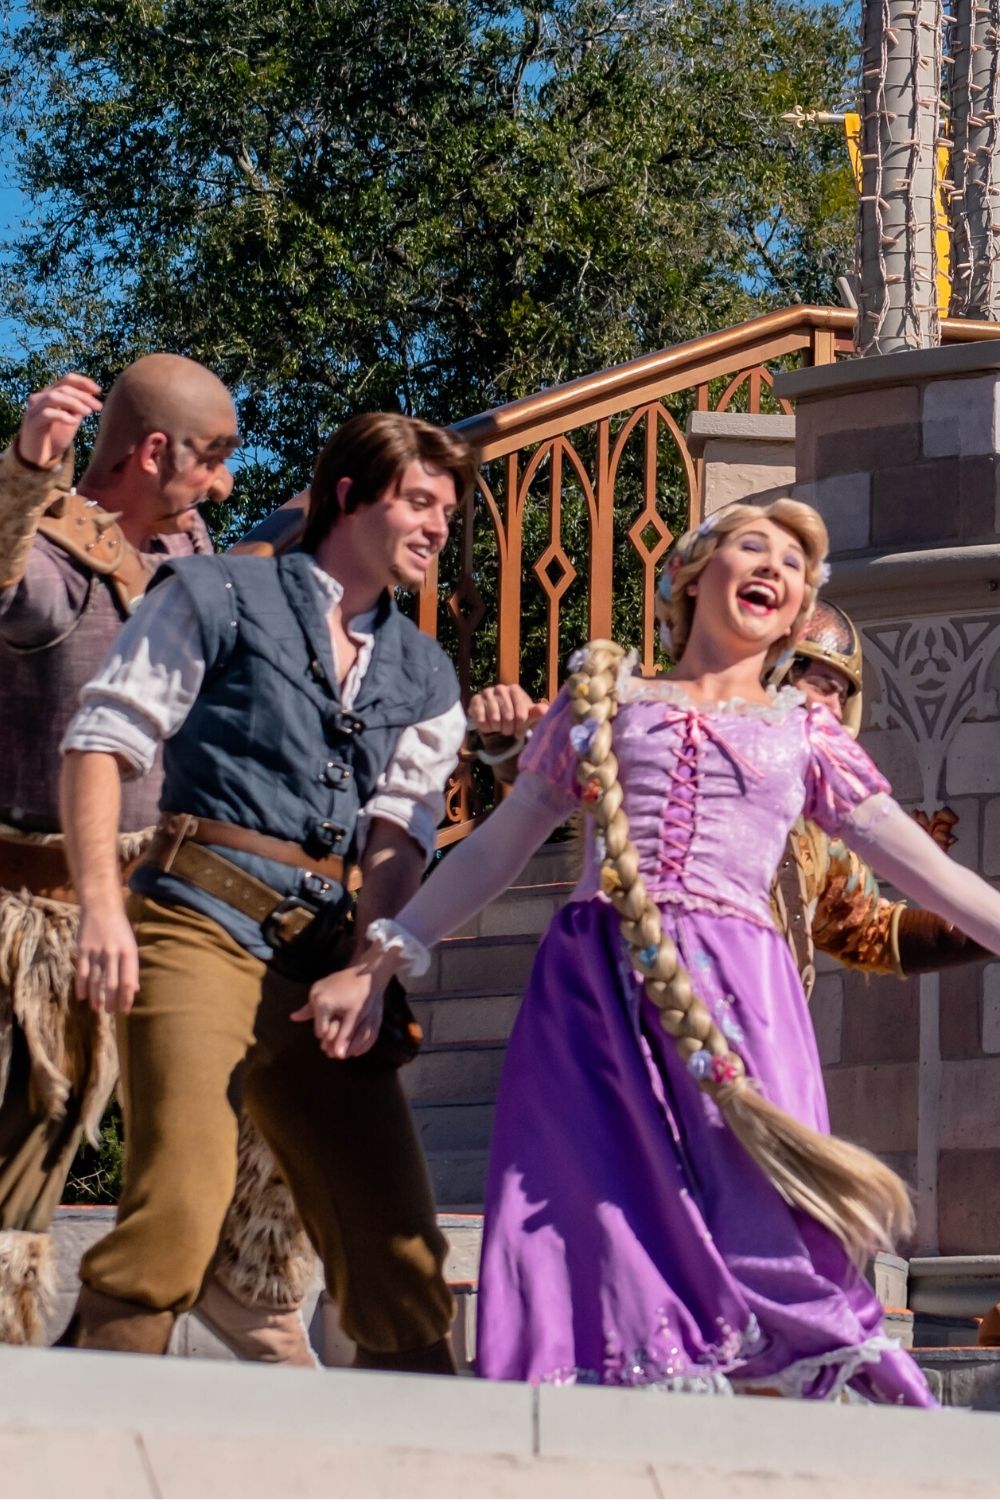 Princess Rapunzel dances with Flynn Rider on a stage show at Disney World